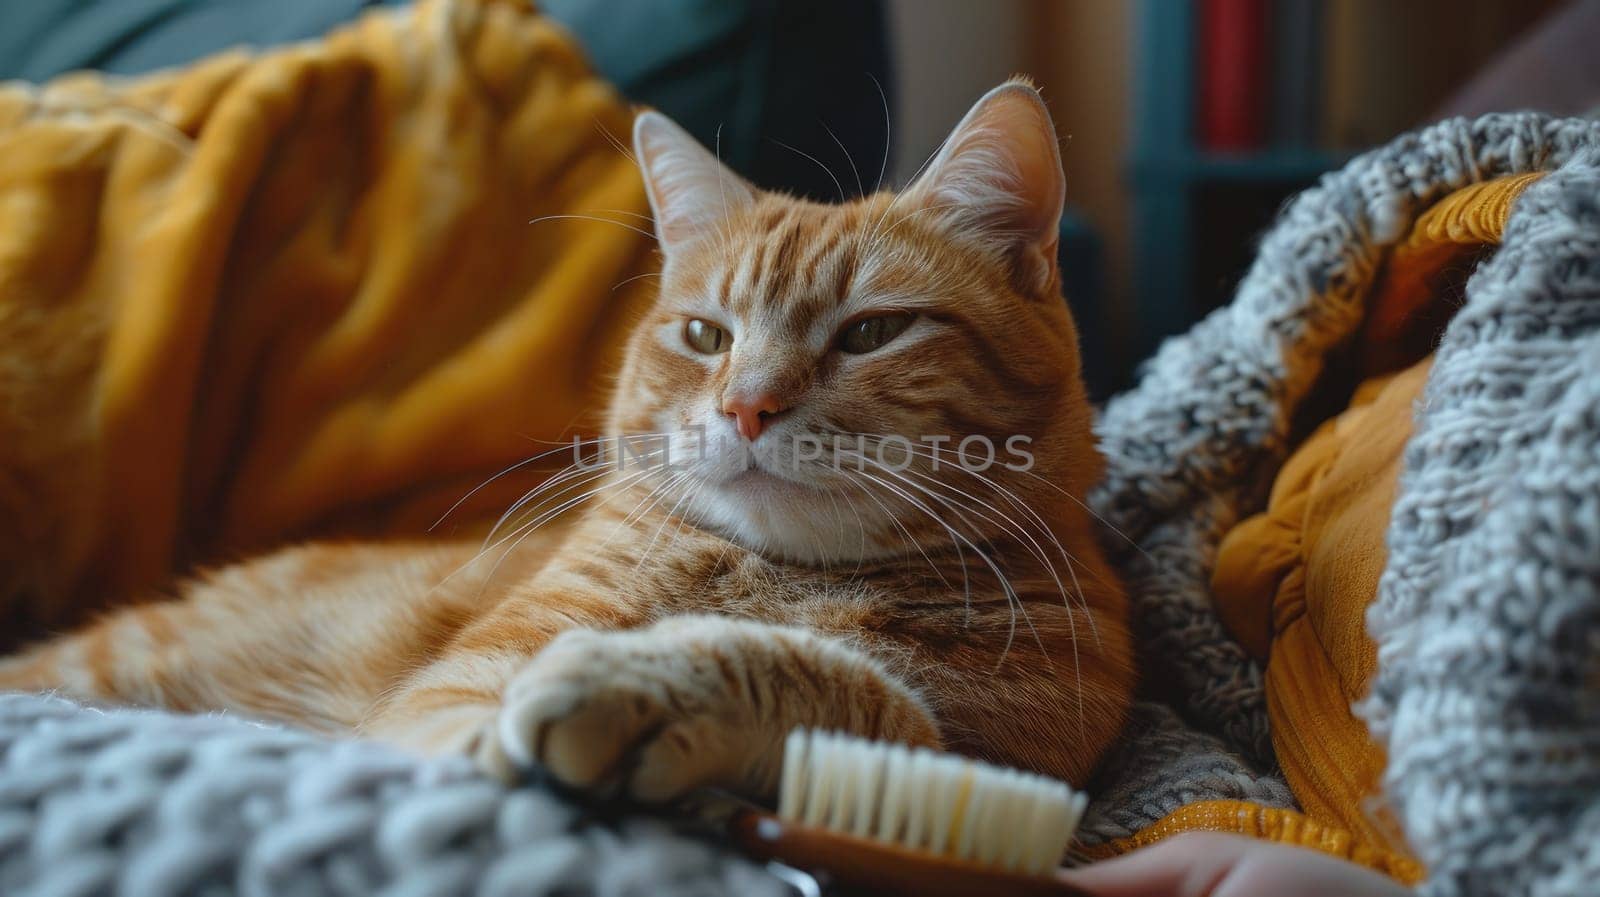 A cat being brushed by its owner on a couch, Regular grooming in pet care, Pet's health and well being.